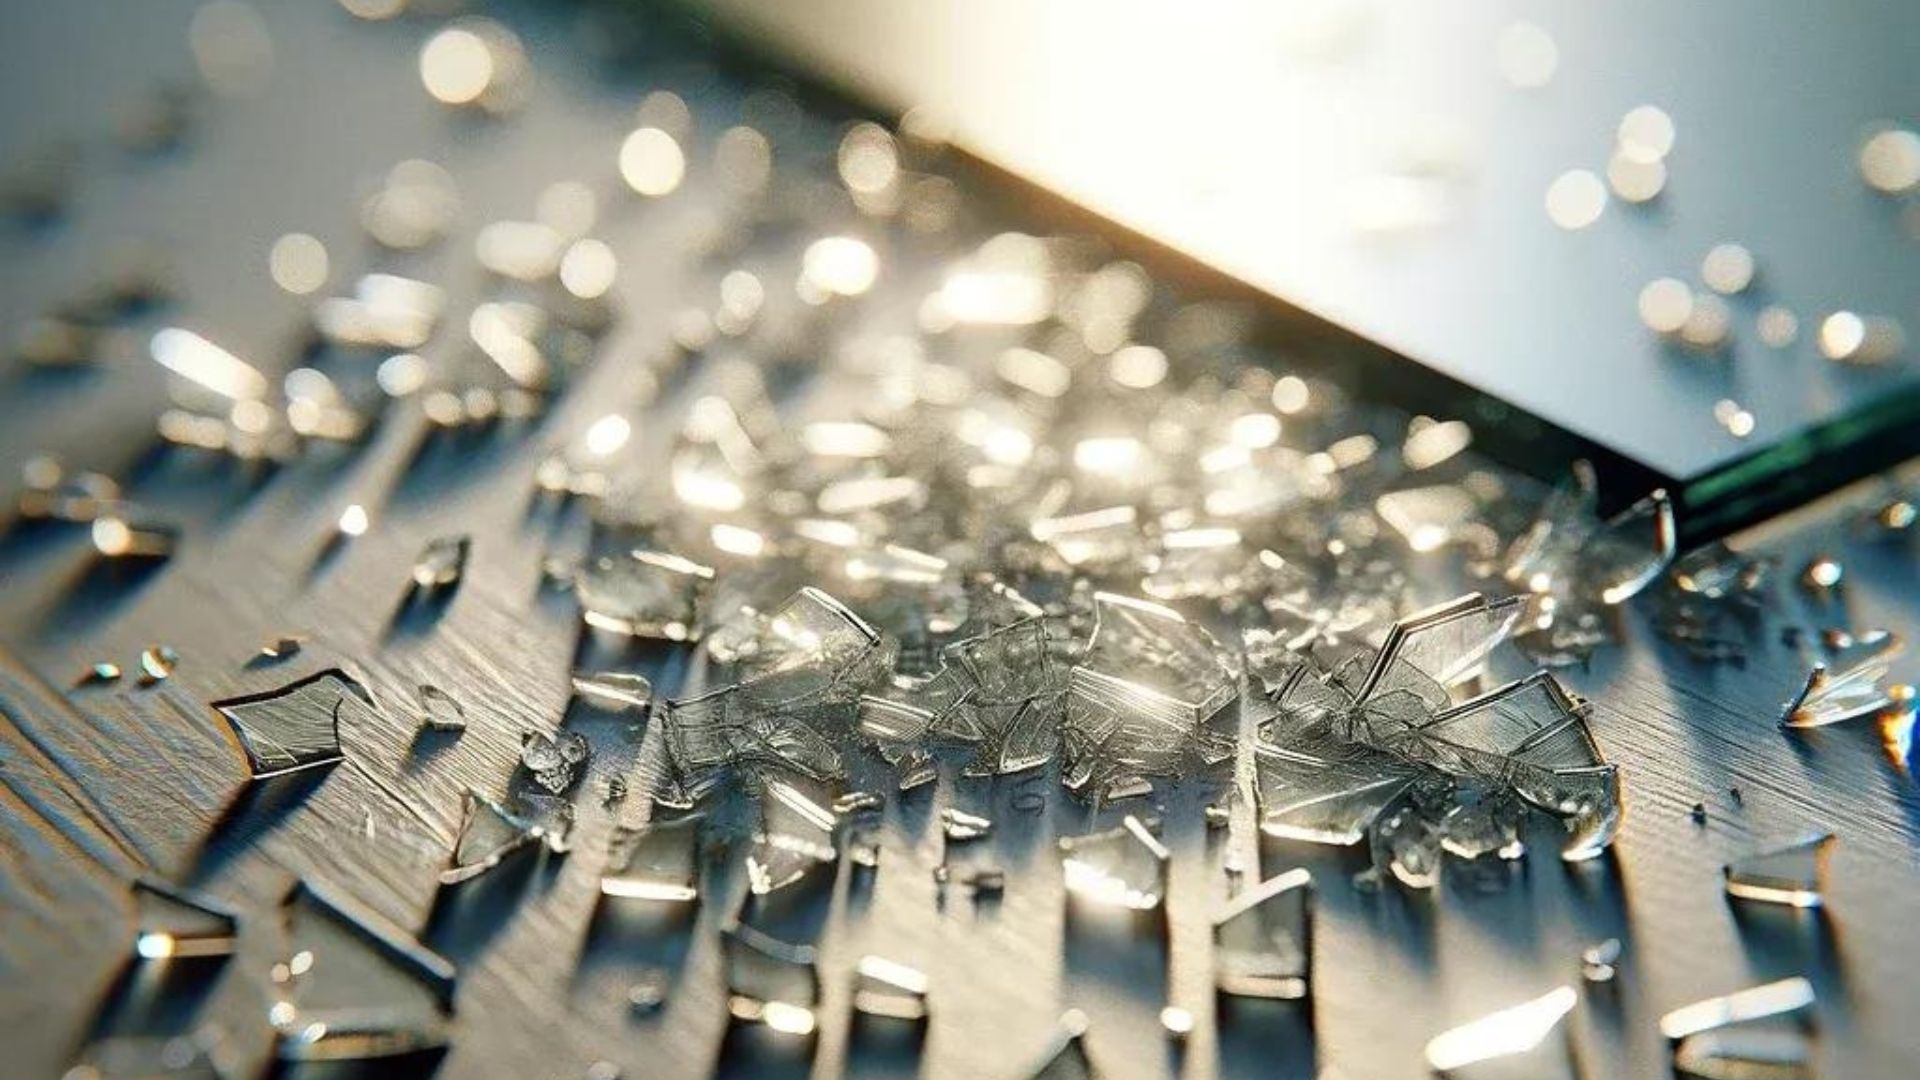 Toughened glass shatters into small pieces rather than large shards. Find out why in this 5-minute guide.
